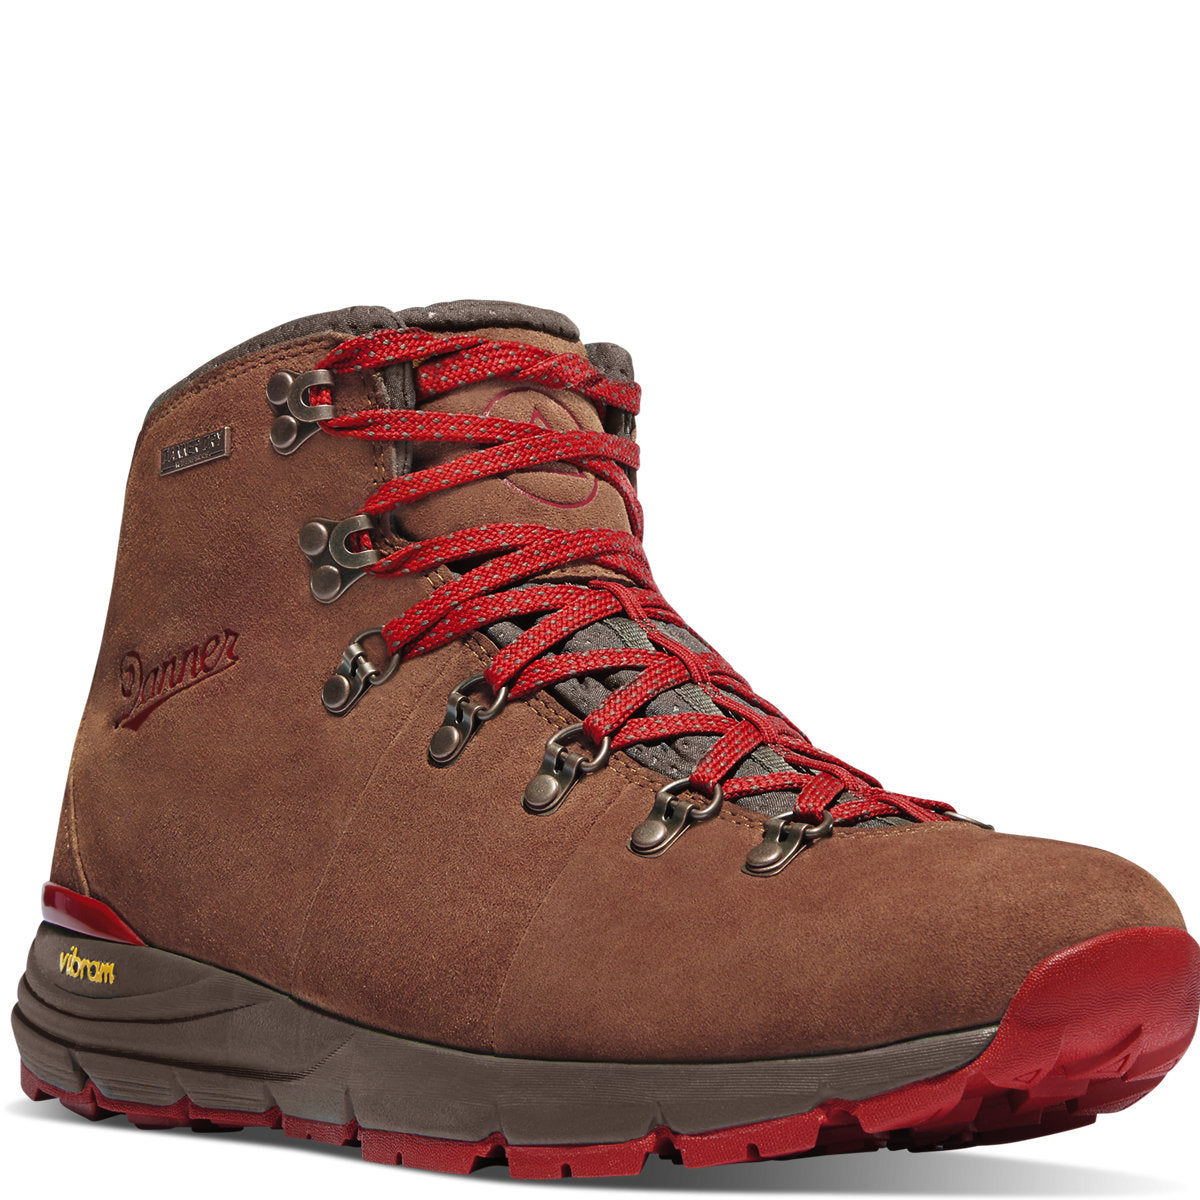 Danner Mountain 600 4.5" Brown/Red 62241